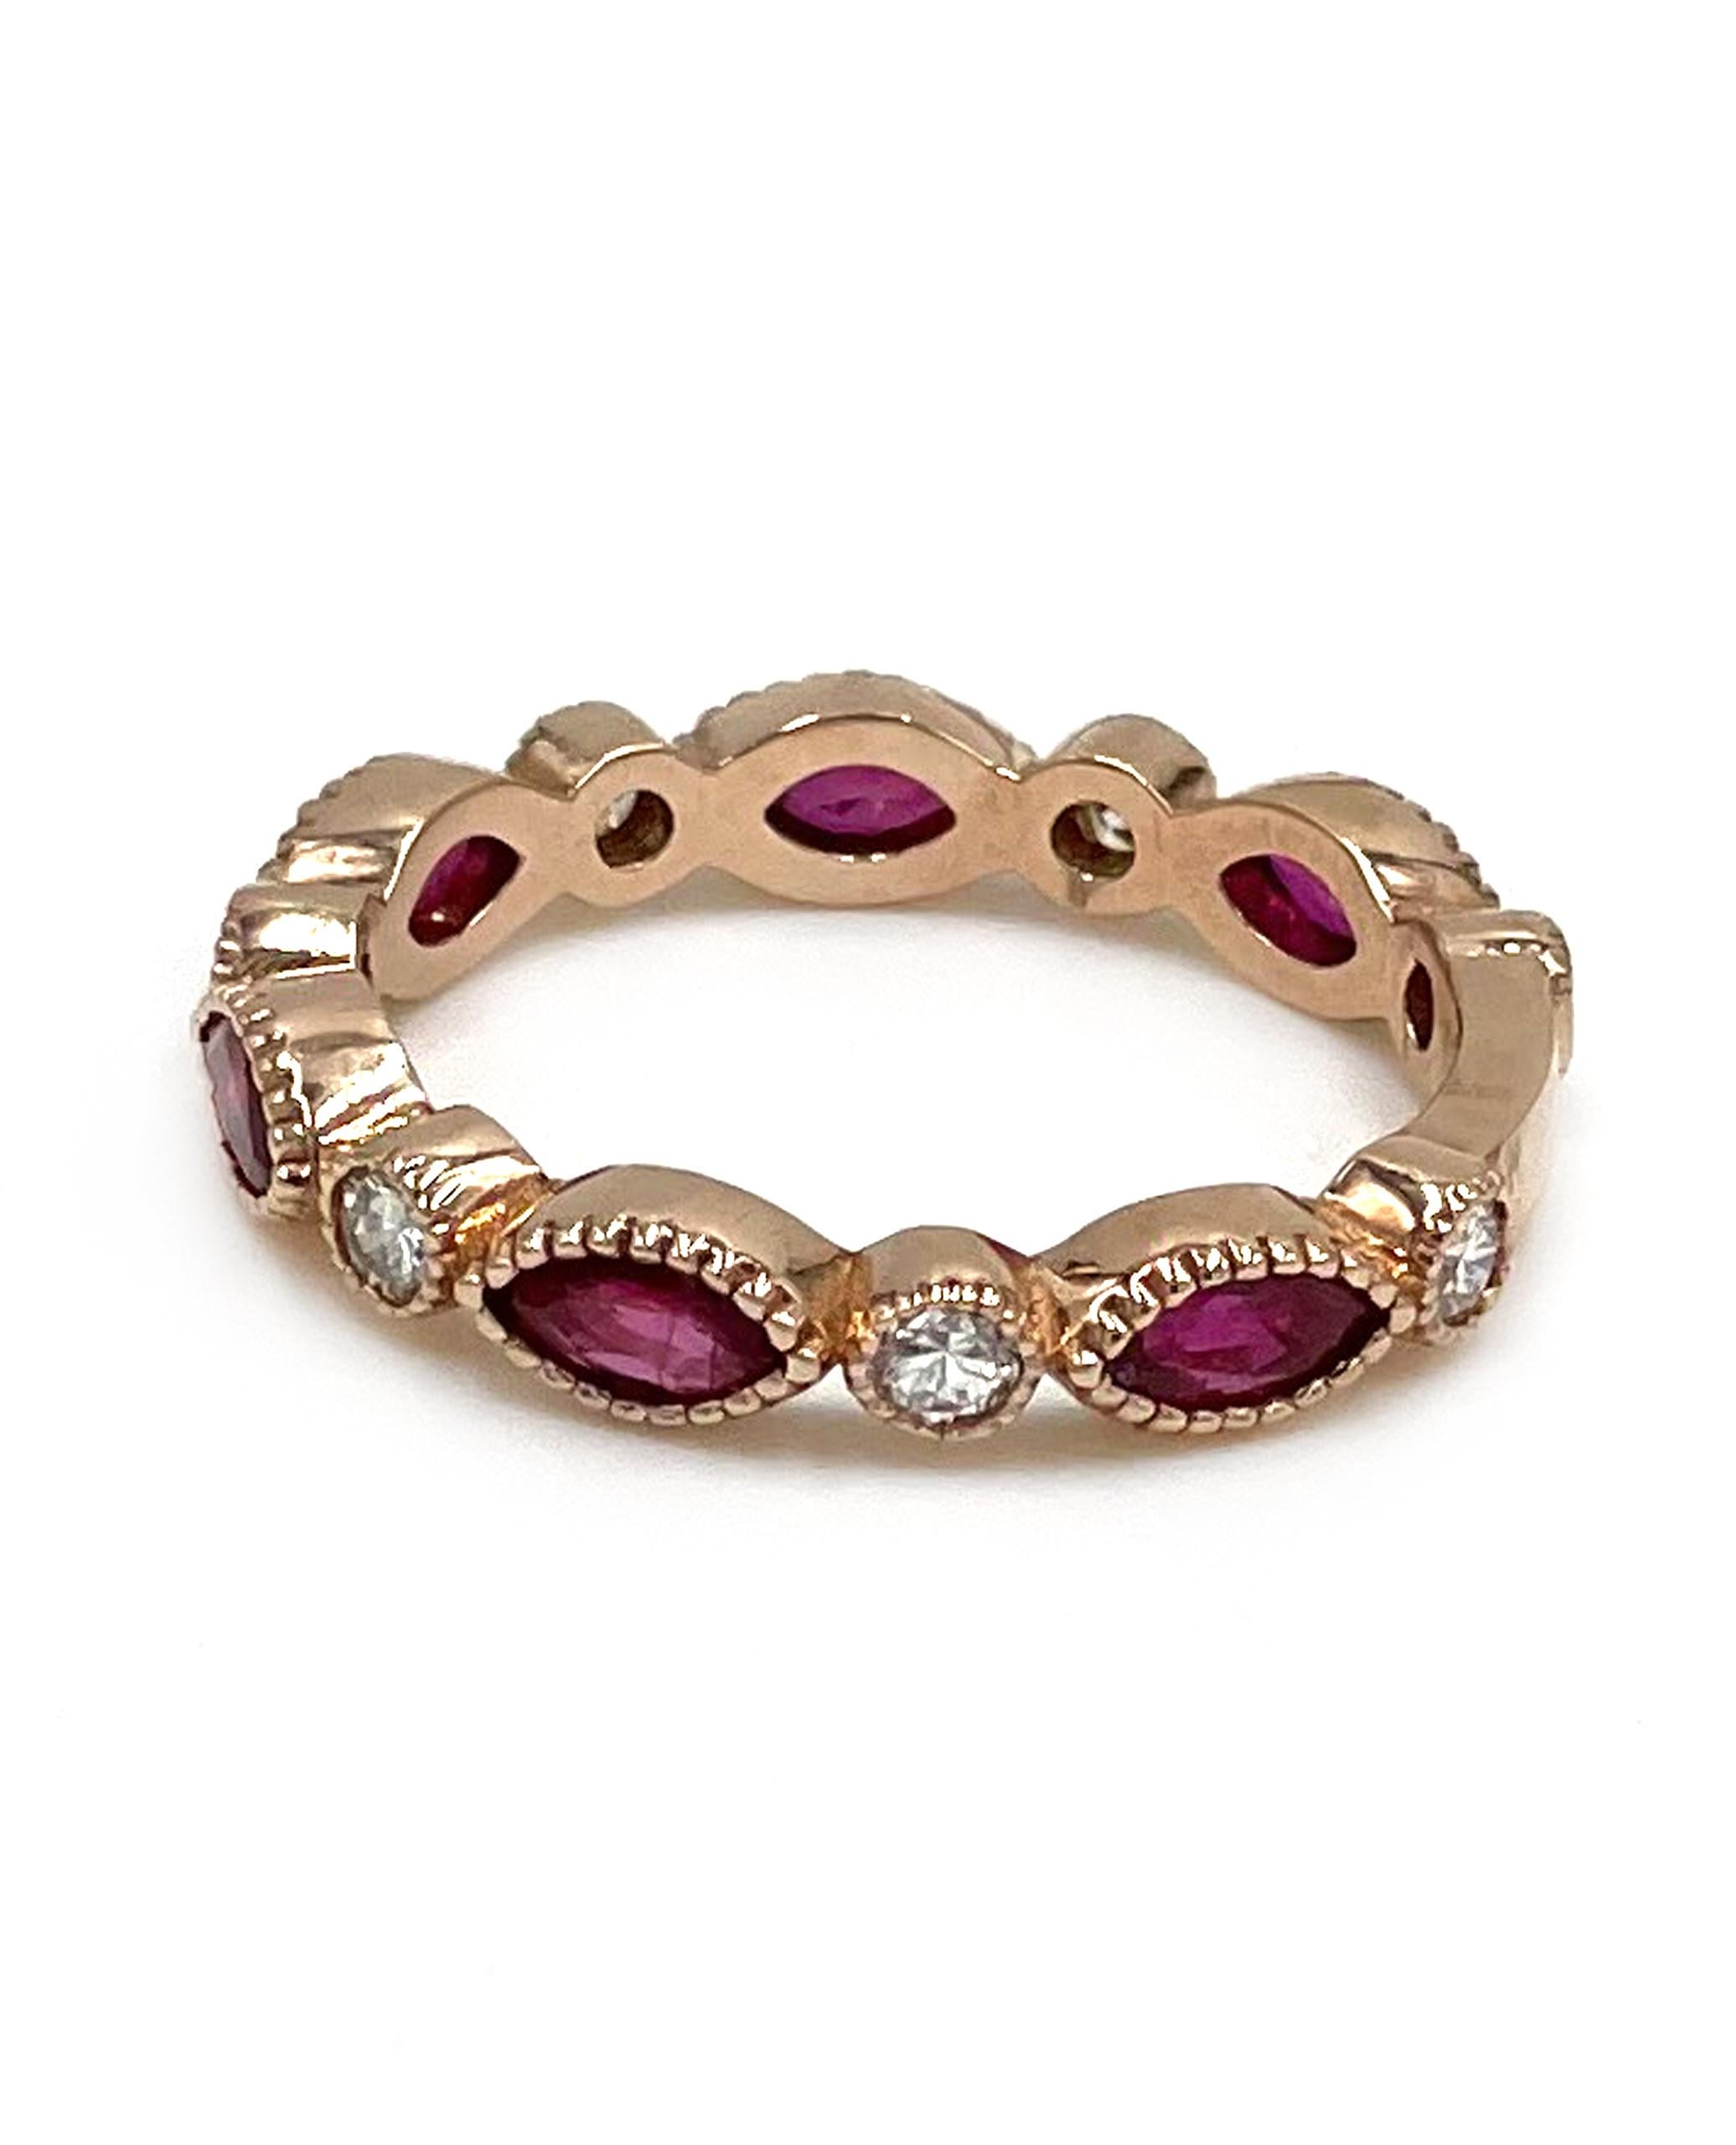 14k rose gold eternity band with 7 diamonds totaling 0.36 carats and 6 marquise-shaped rubies totaling 1.16 carats.

- Finger size 7.25
- G/H color, SI1/SI2 clarity
- Miligrain edged detail
- Stackable with other rings